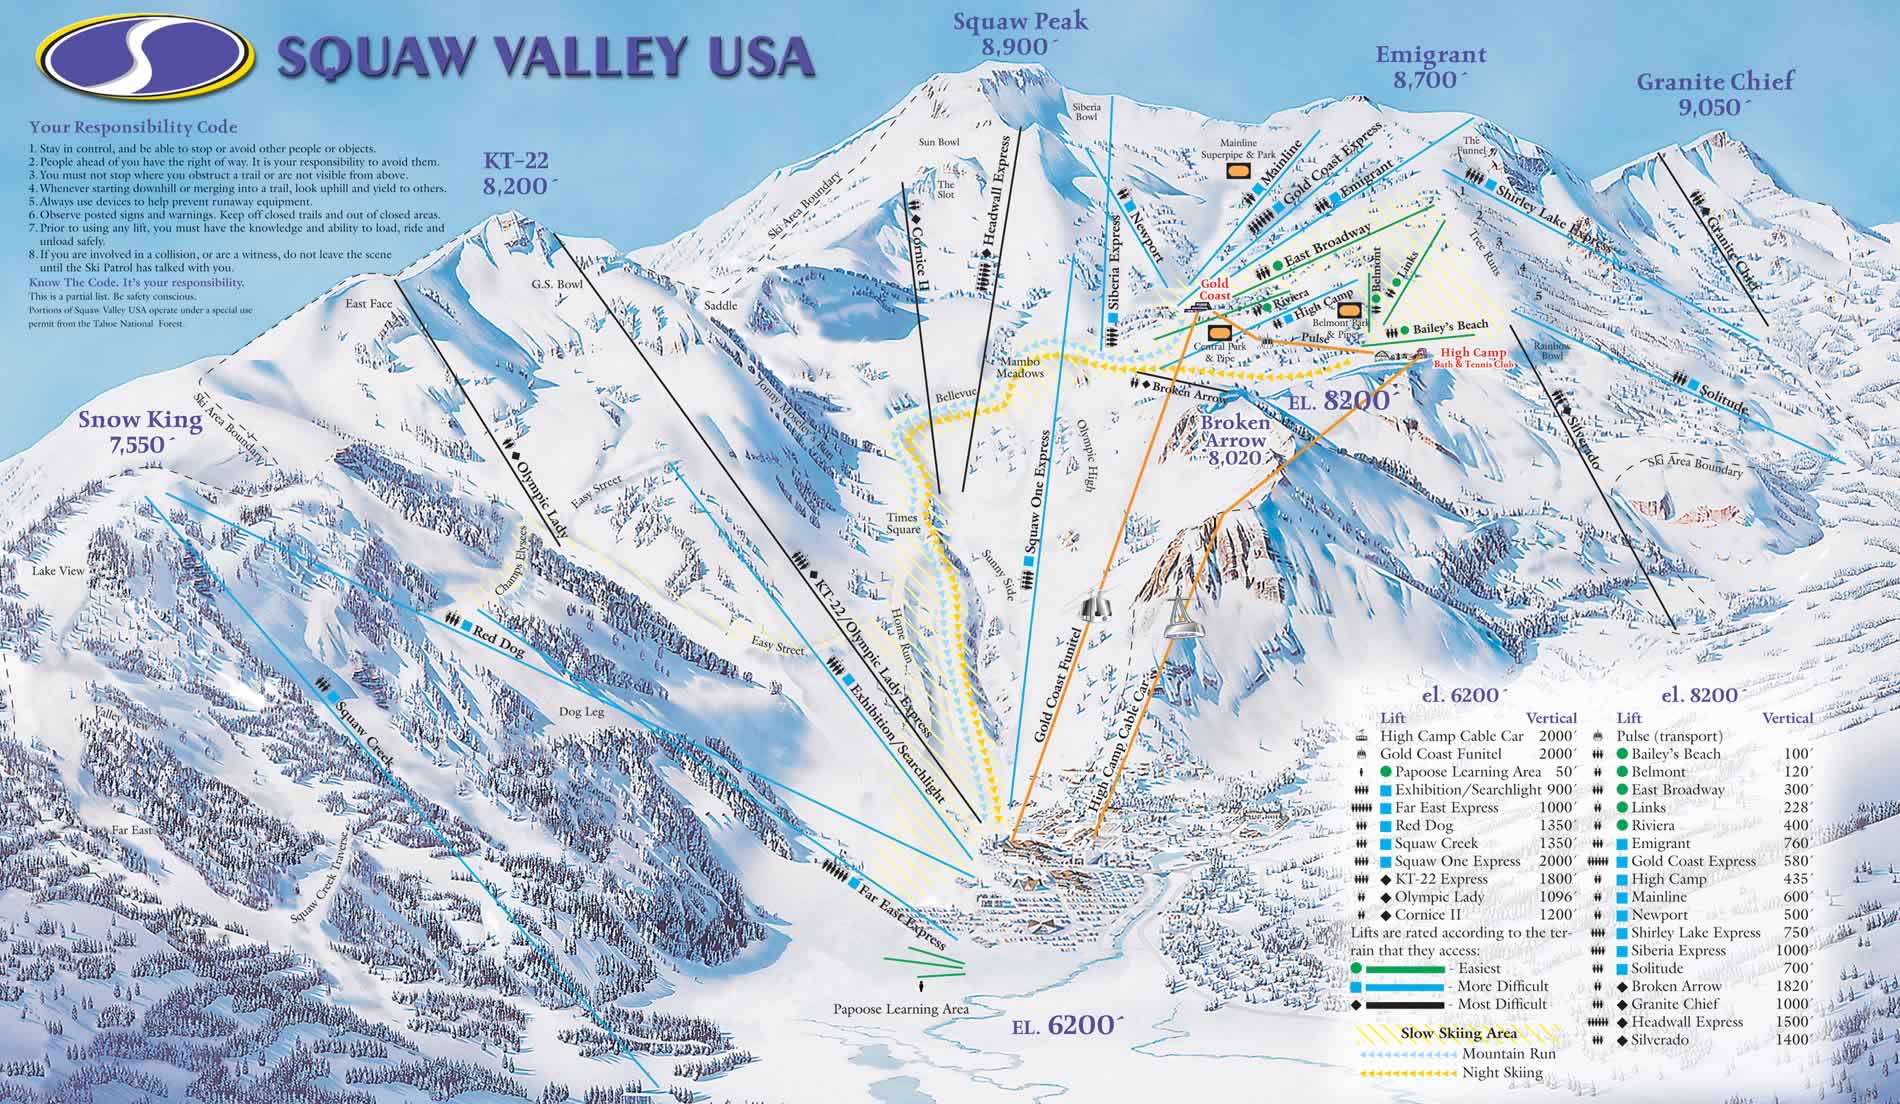 Squaw Valley, USA trail map